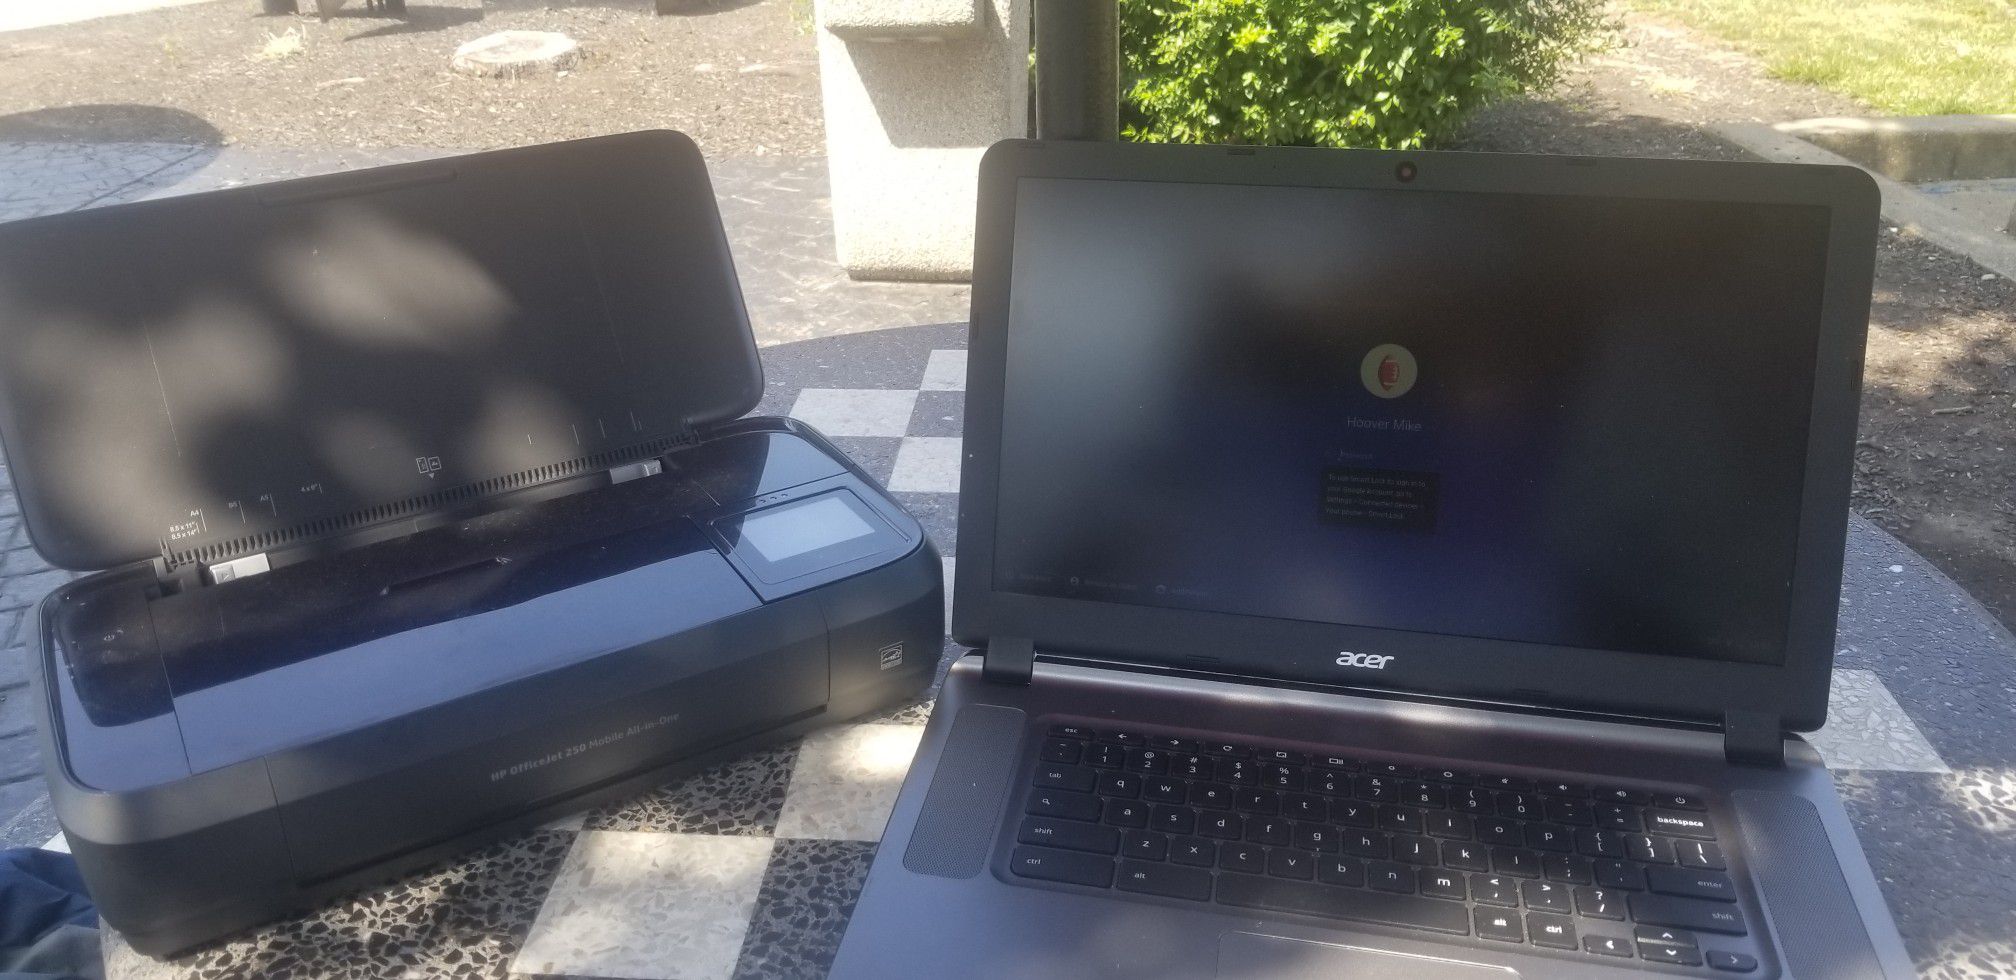 Acer laptop and Hp officejet 250